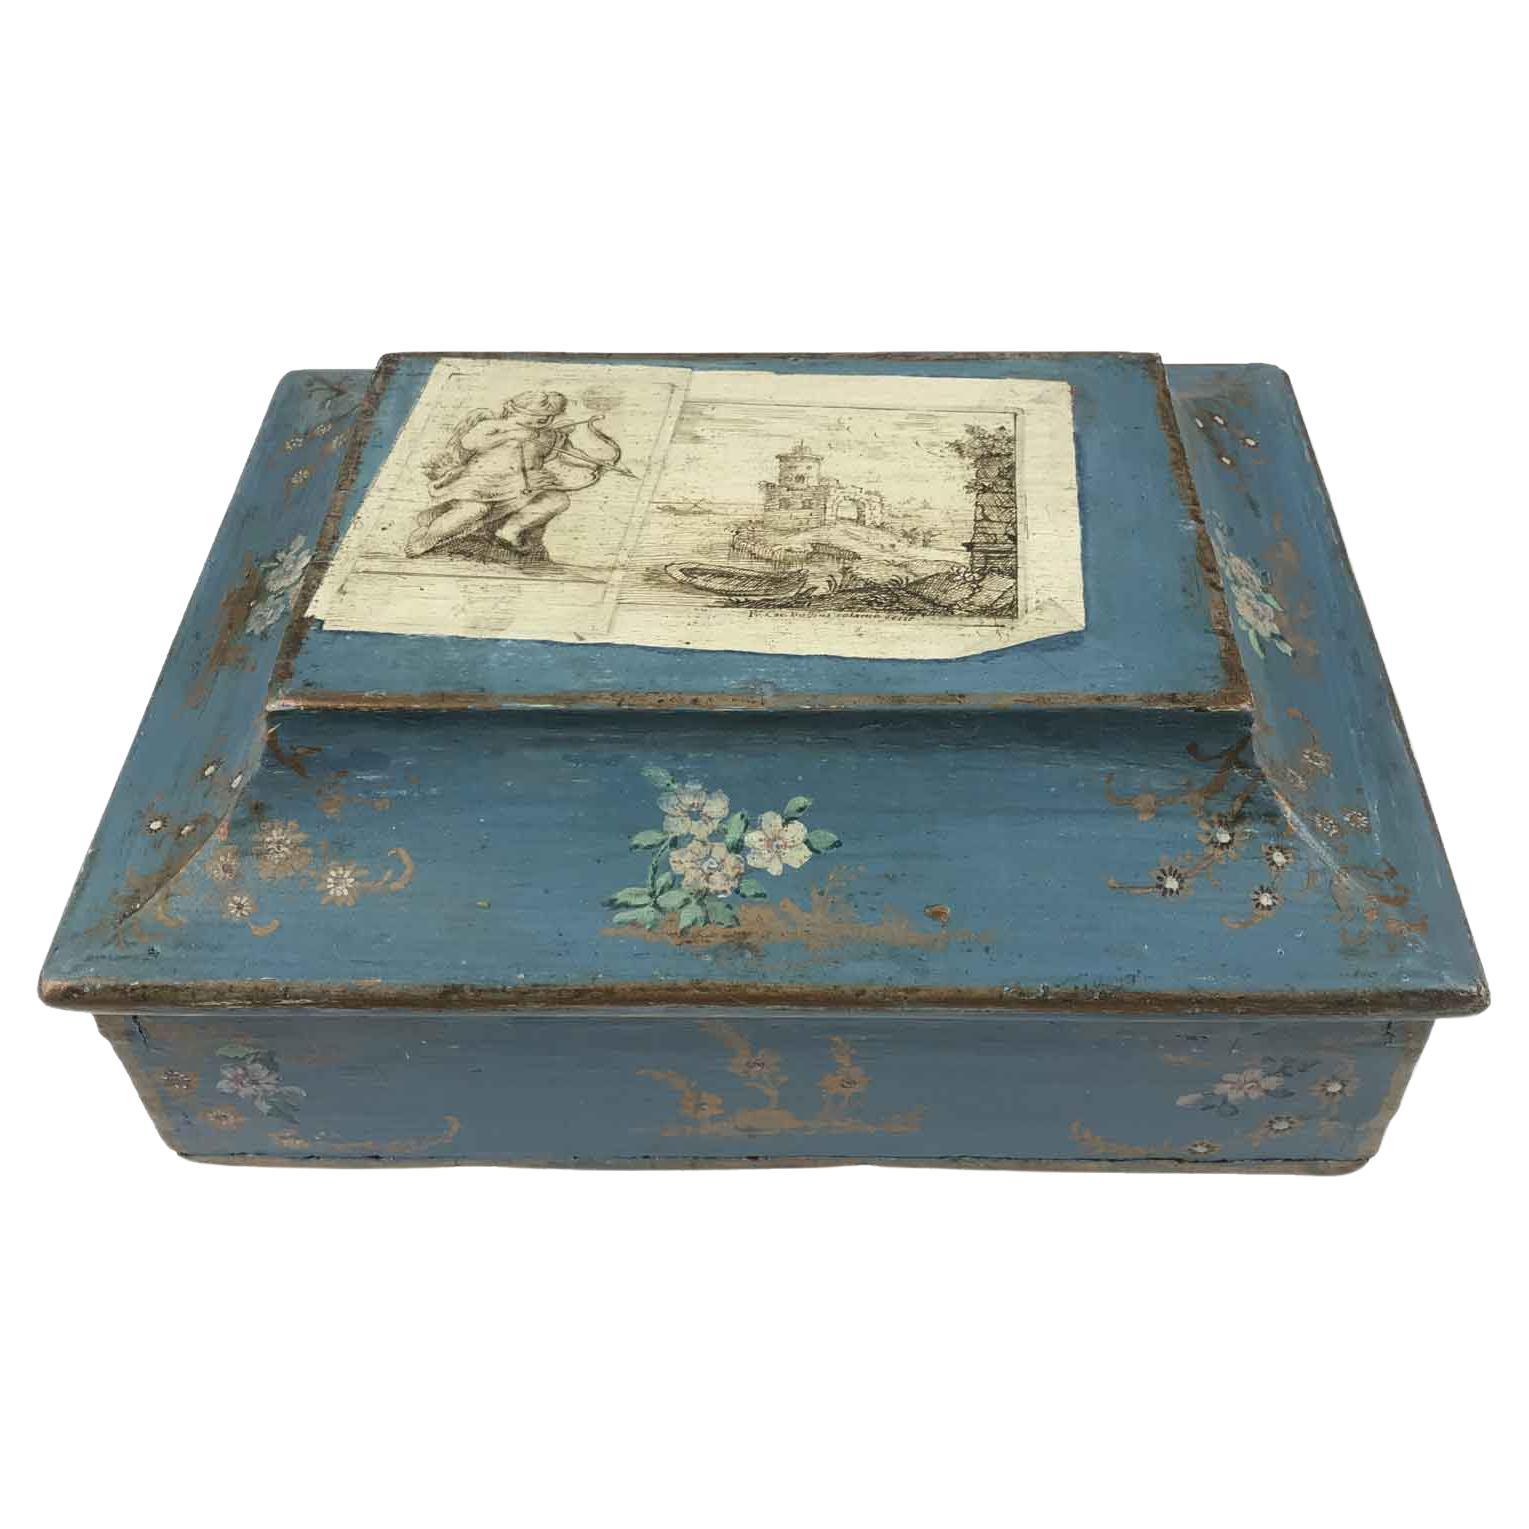 Late 18th century Italian lacquered wooden box with Faux Paper and Flowers. Made in shades of blue and decorated on all sides, this romantic Italian antique box is decorated with flower and vegetal patterns in pink and gold but the unique feature is